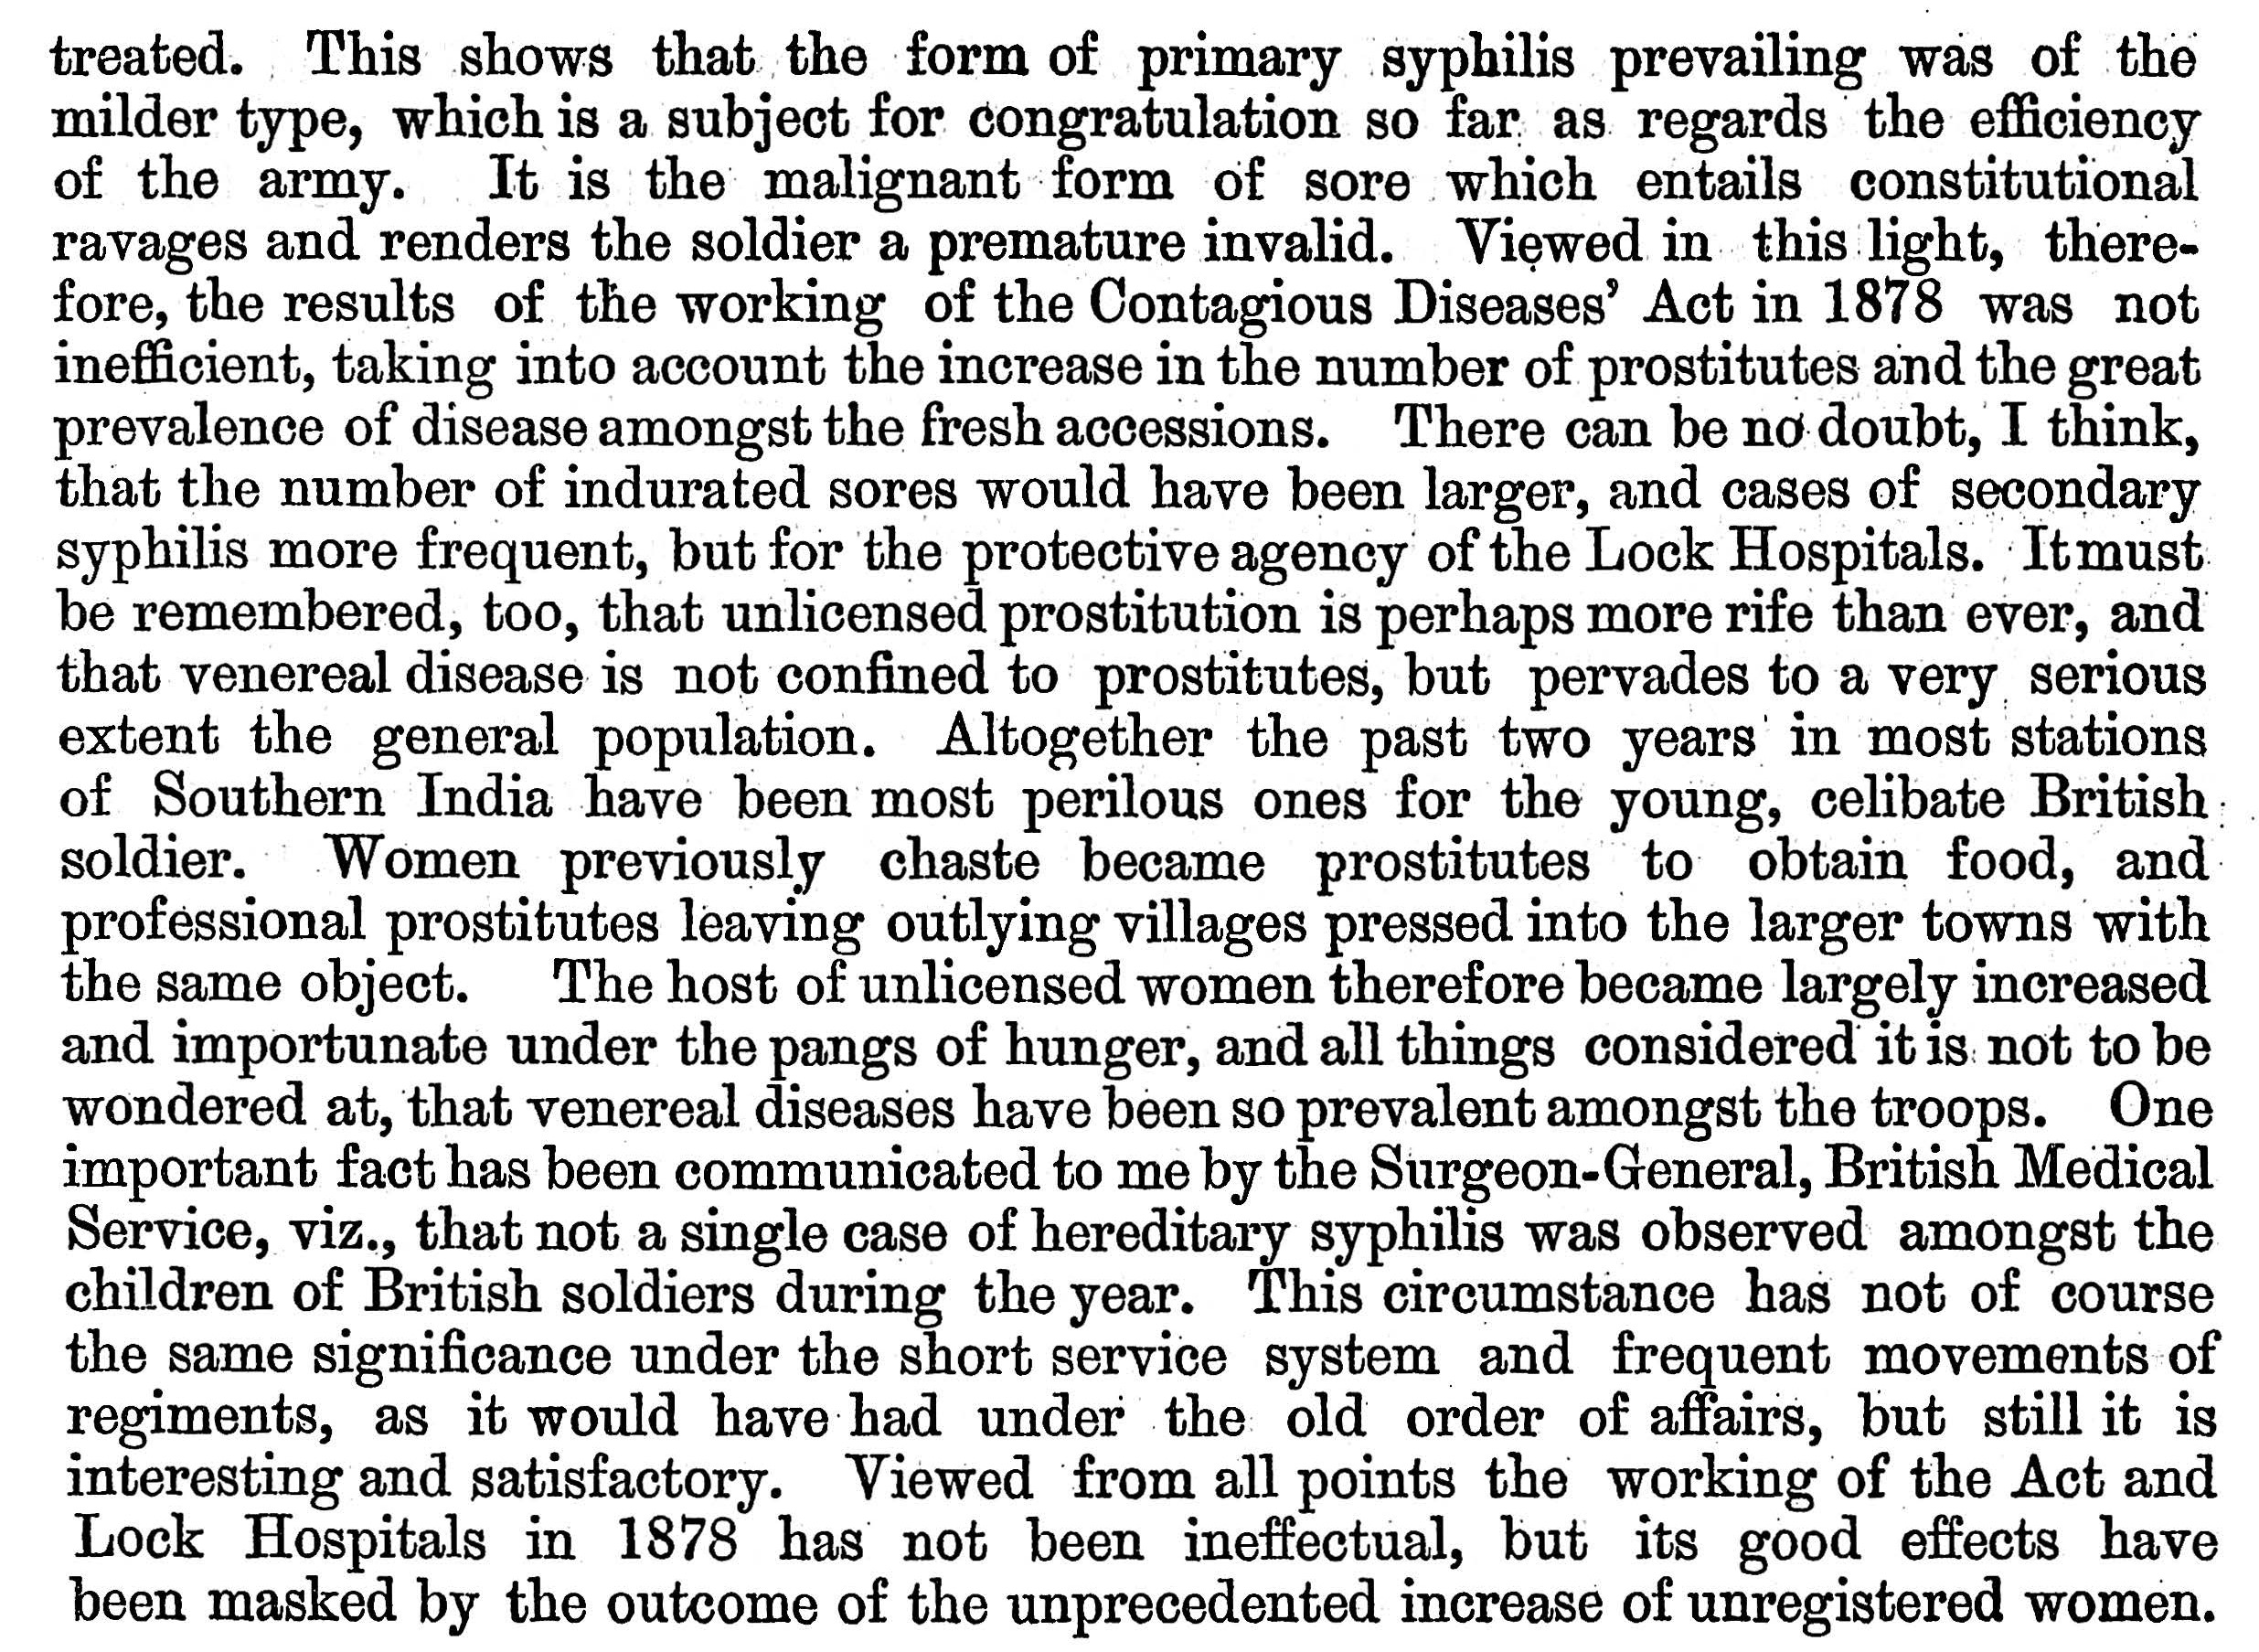 Excerpt from a lock hospital report. It states that there has been an increase in primary syphilis but claims that were it not for the lock hospitals, the more harsh secondary syphilis would have been more prevalent. The report mentions an increase of unlicensed sex workers and cites this as the reason for an increase in sexually transmitted infections in the army.